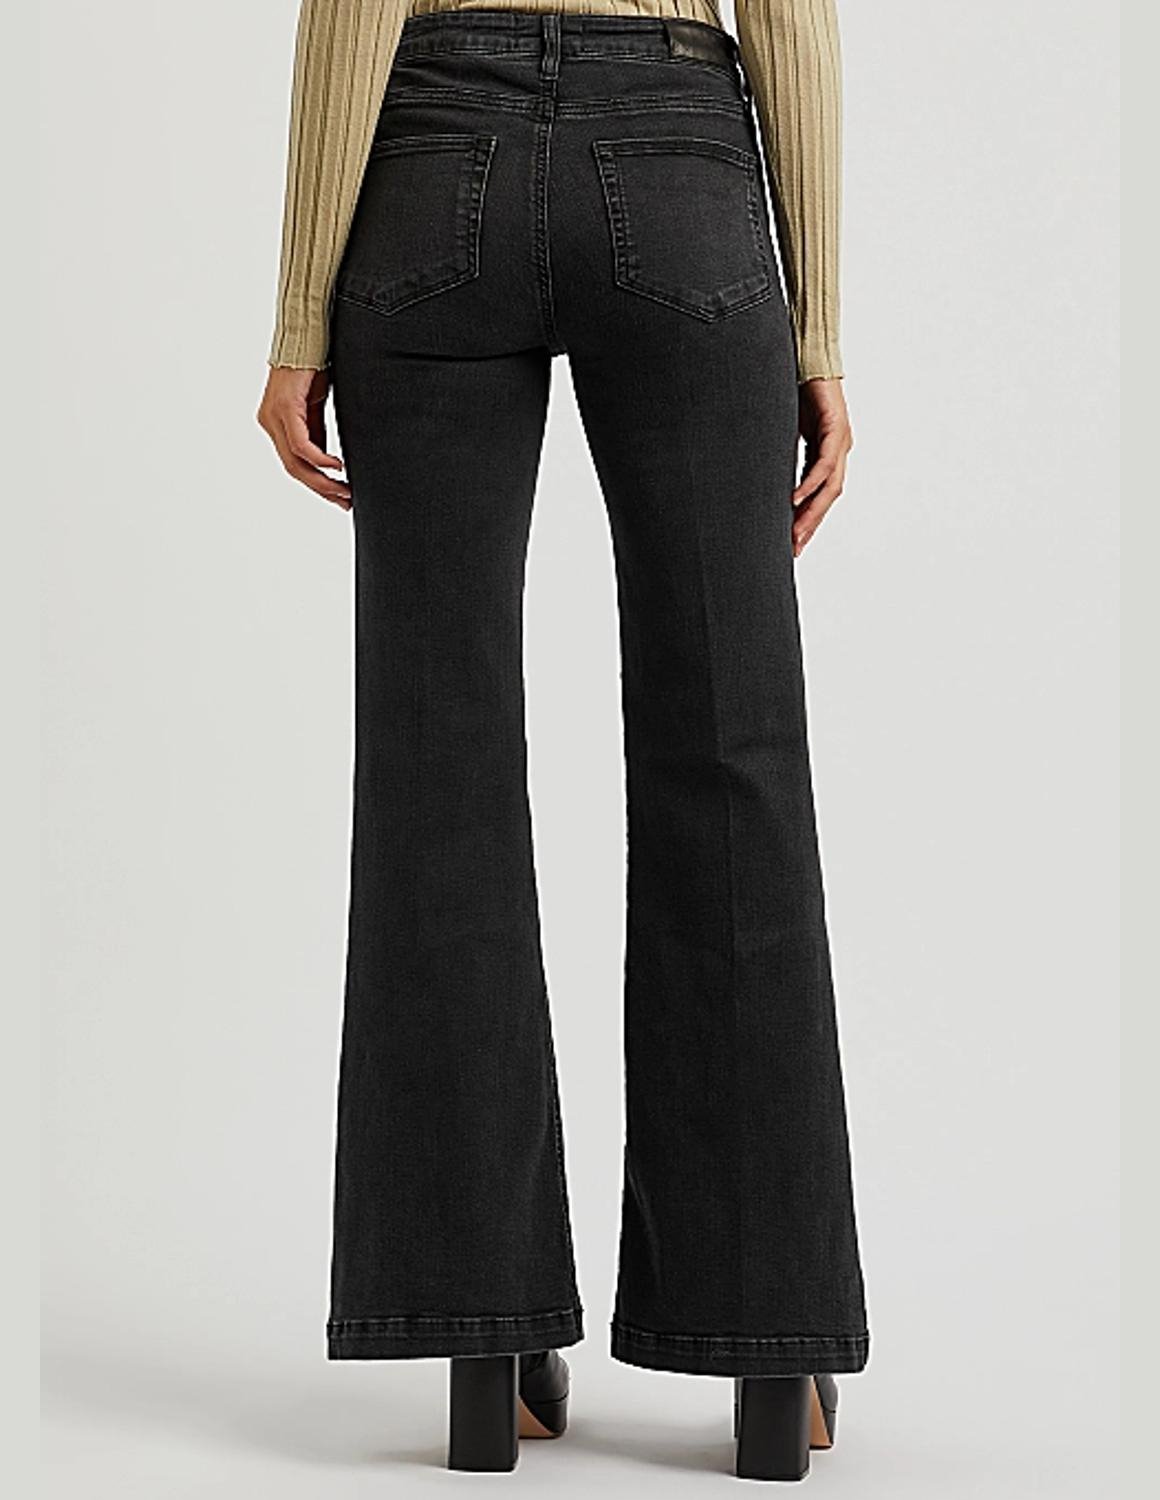 Paige Genevieve Flare Jeans - Black - Feather & Stitch